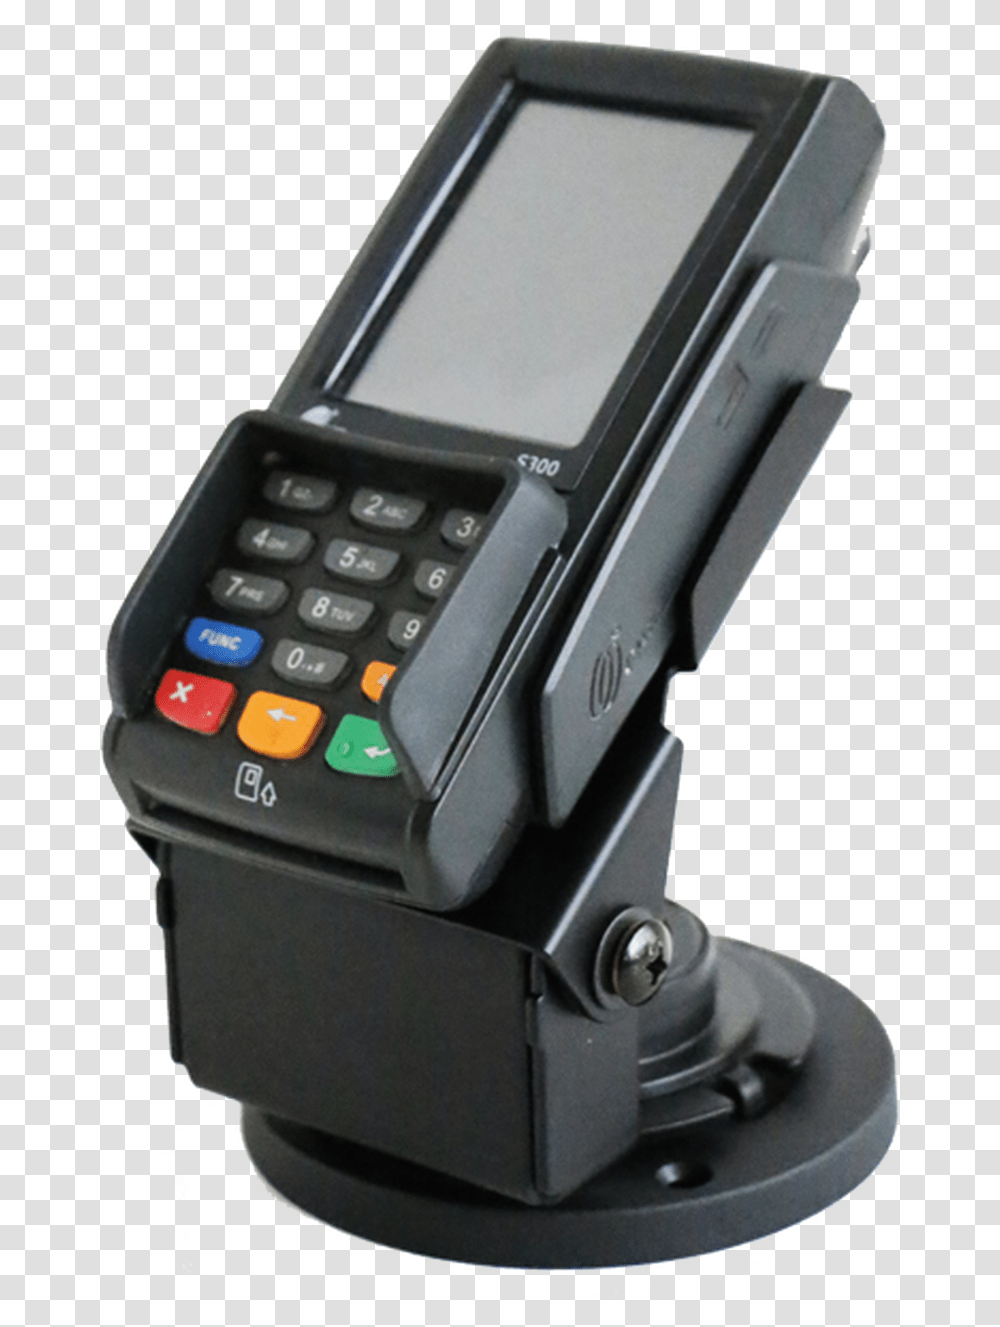 Pax S300 Credit Card Stand Low Profile By Swivel Stands Pax, Mobile Phone, Electronics, Cell Phone, Wristwatch Transparent Png